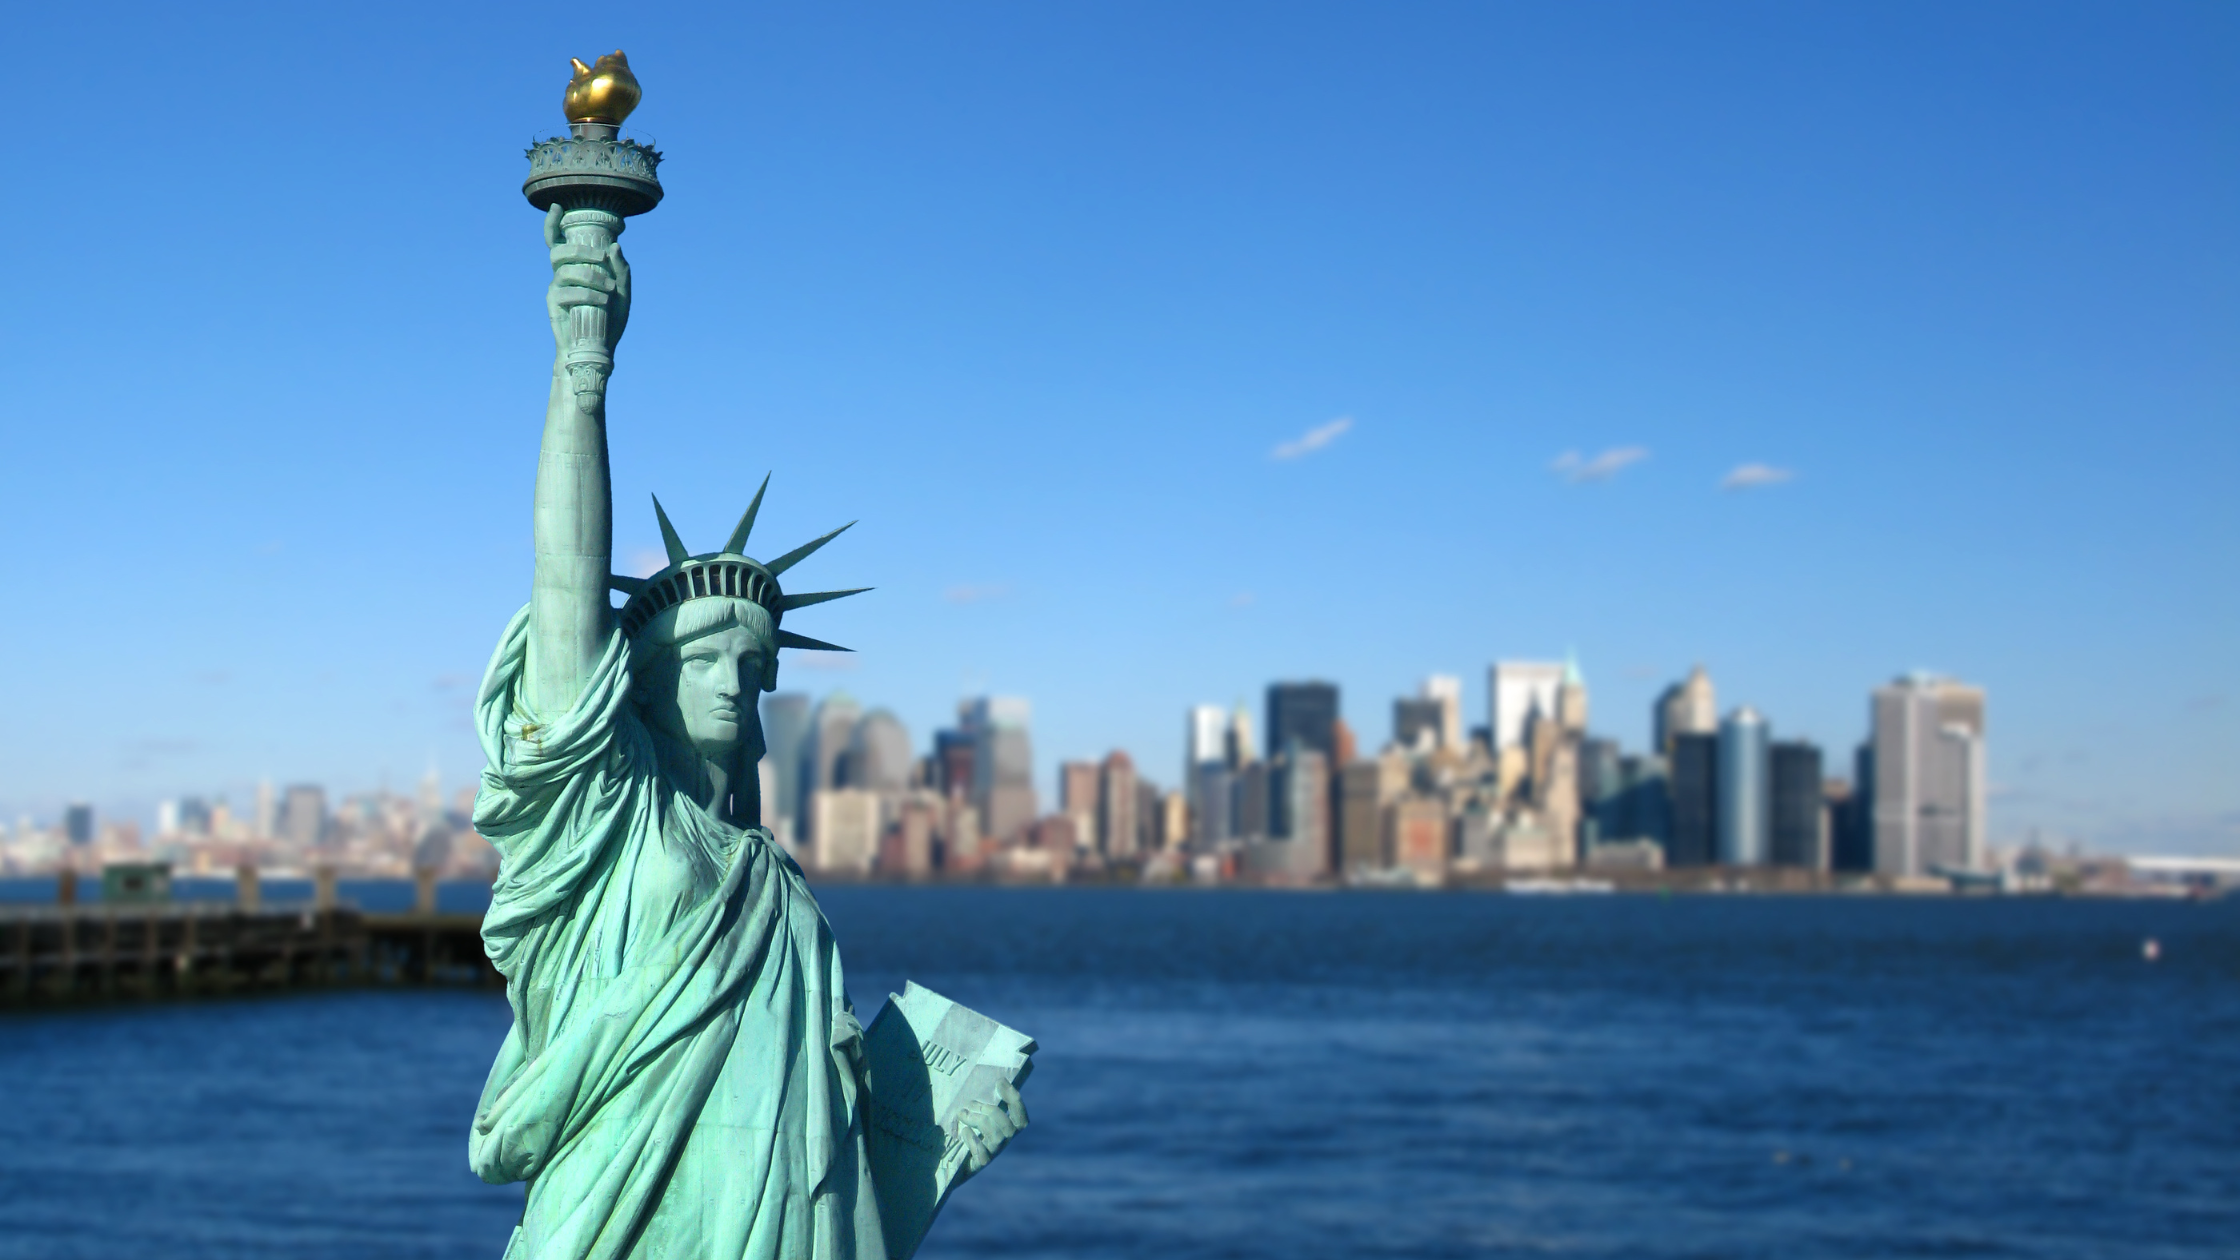 International healthcare professionals: why now is the right time to move to the USA